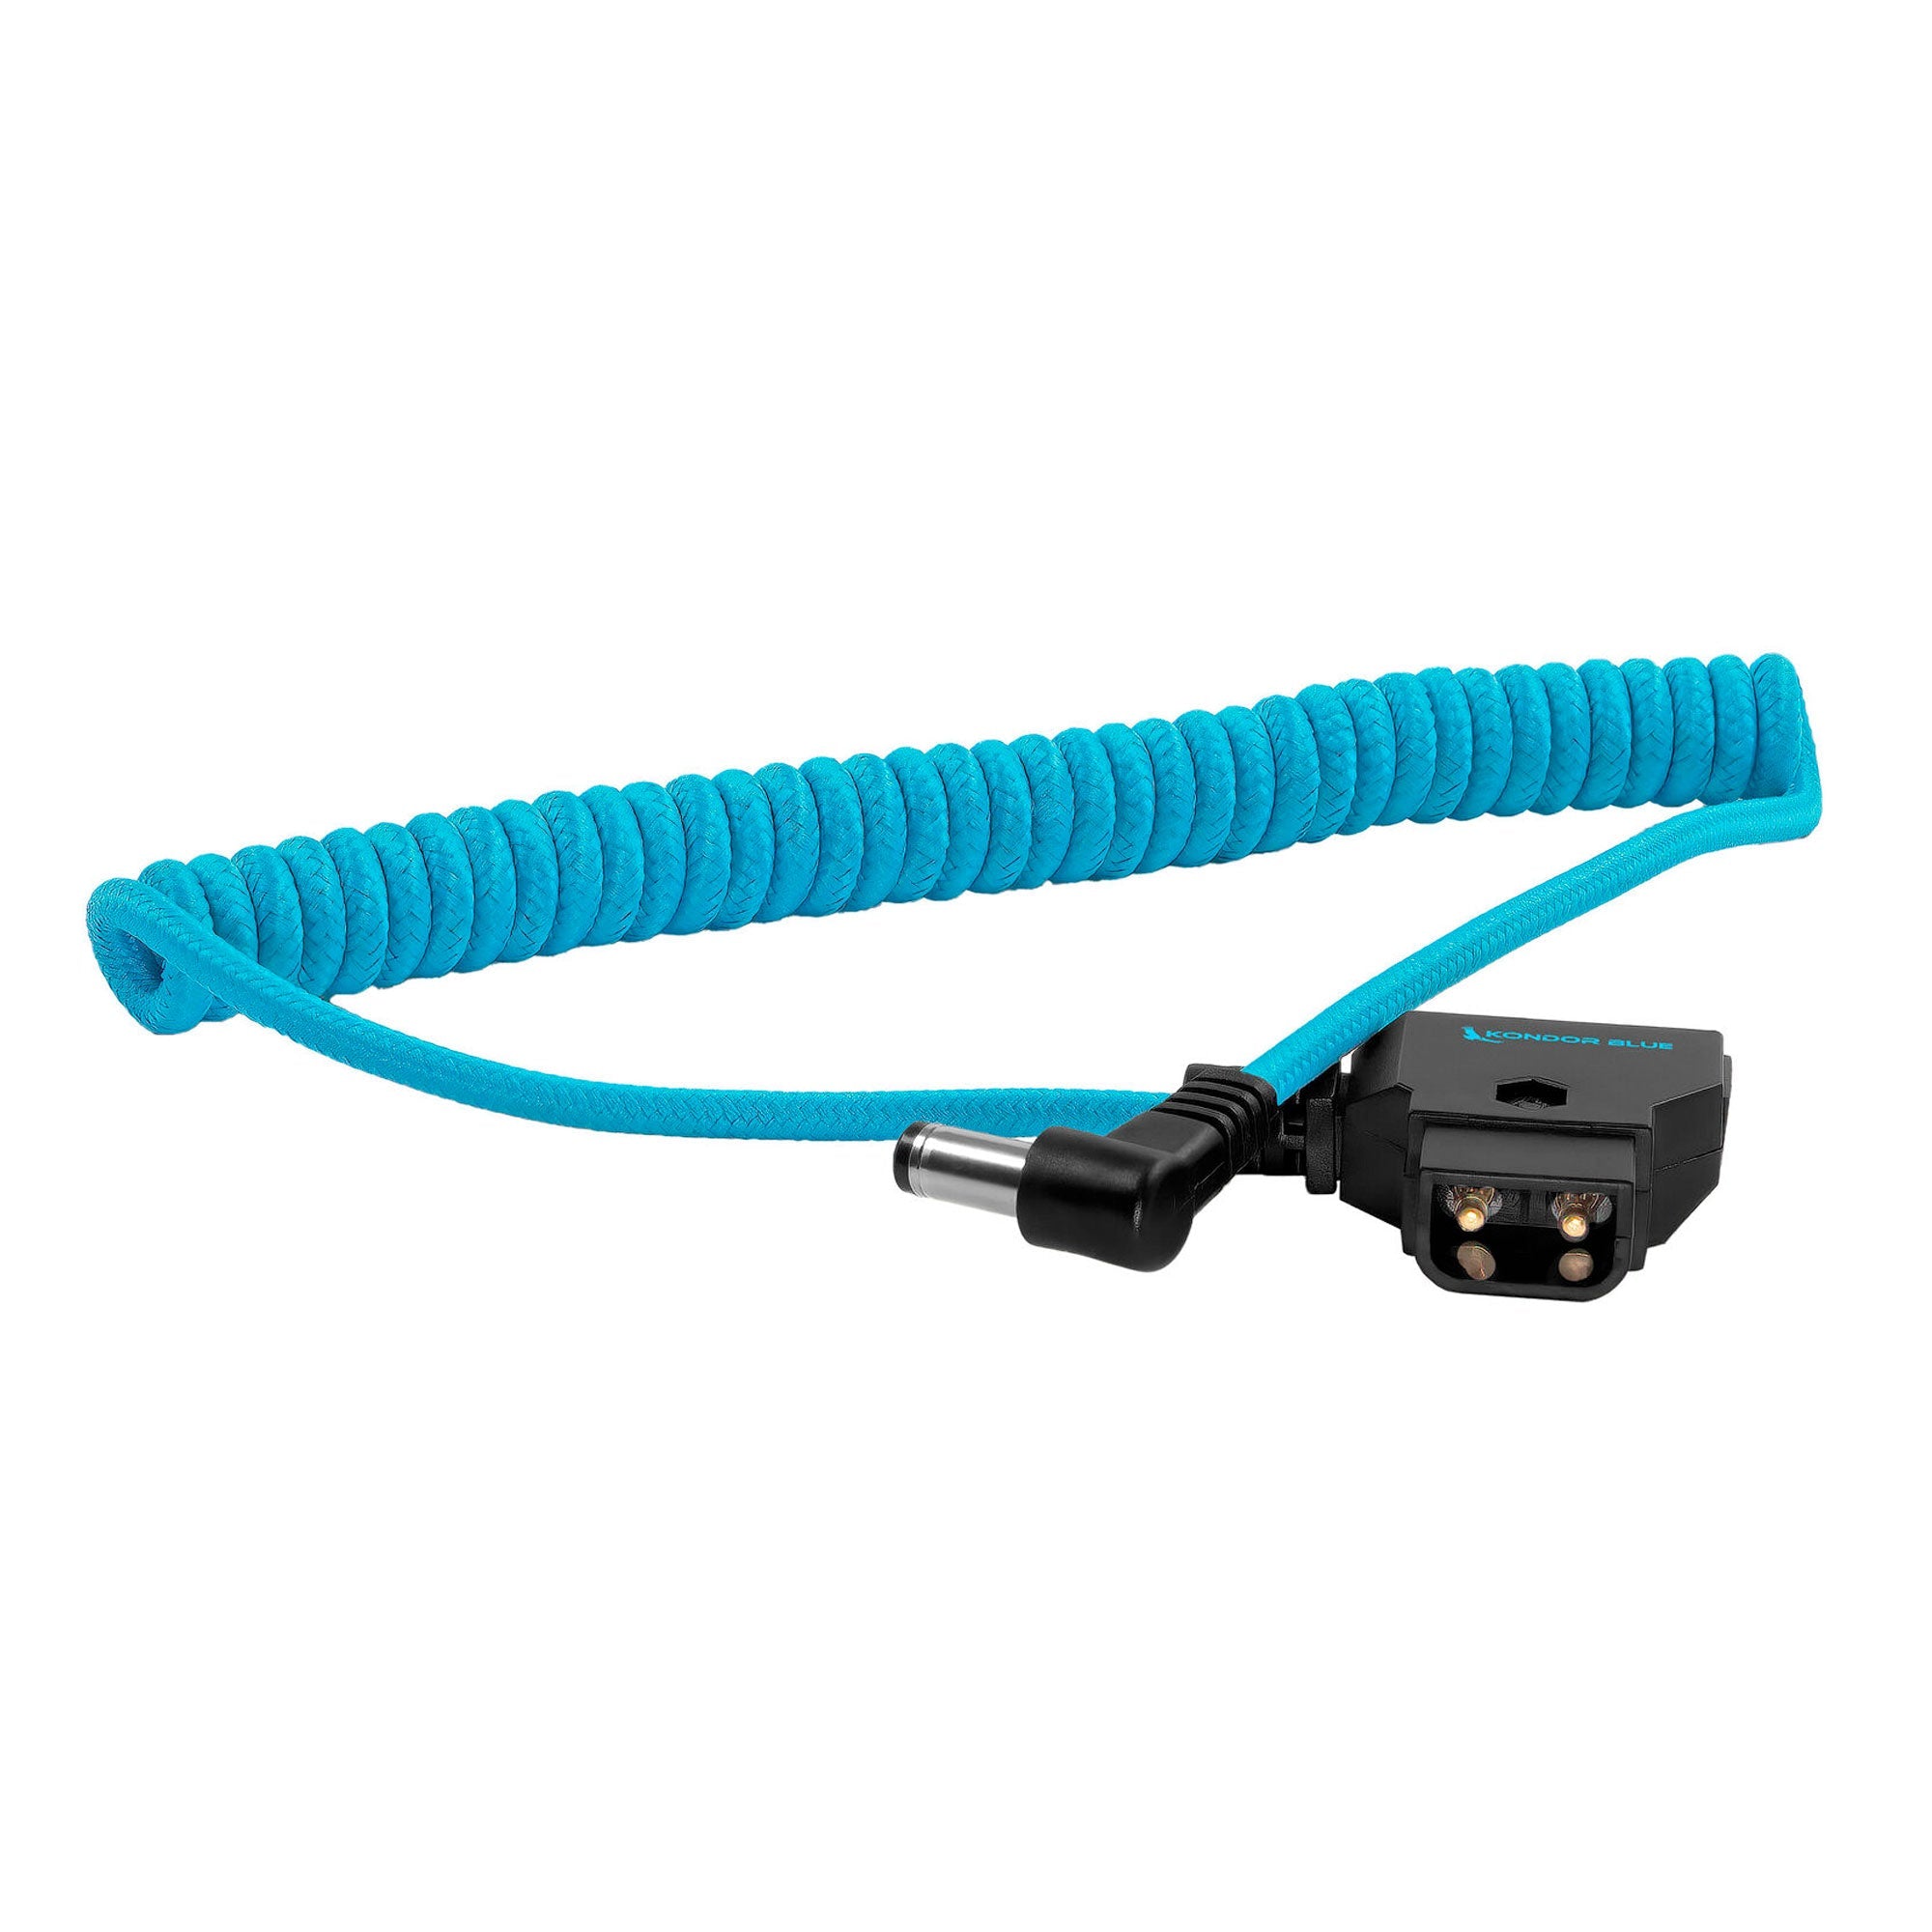 Kondor Blue Coiled D-Tap to DC 5.5 x 2.5mm Barrel Right-Angle Cable (Blue)